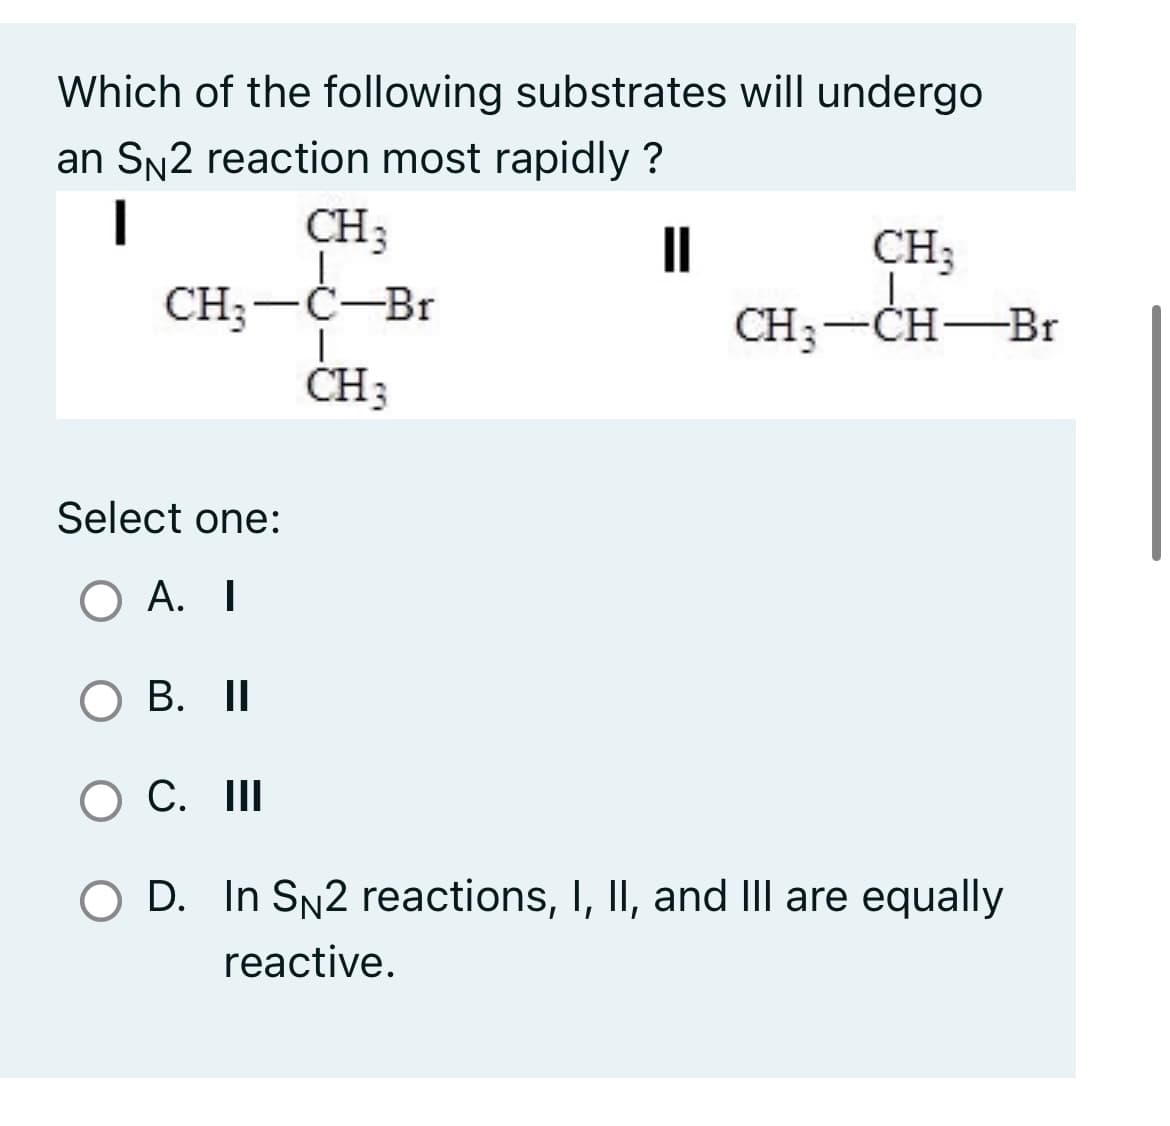 Which of the following substrates will undergo
an SN2 reaction most rapidly?
I
CH3
CH3 -Ċ-Br
CH3
—
11
CH3
CH3-CH-Br
Select one:
OA. I
O B. II
O C. III
O D. In SN2 reactions, I, II, and III are equally
reactive.